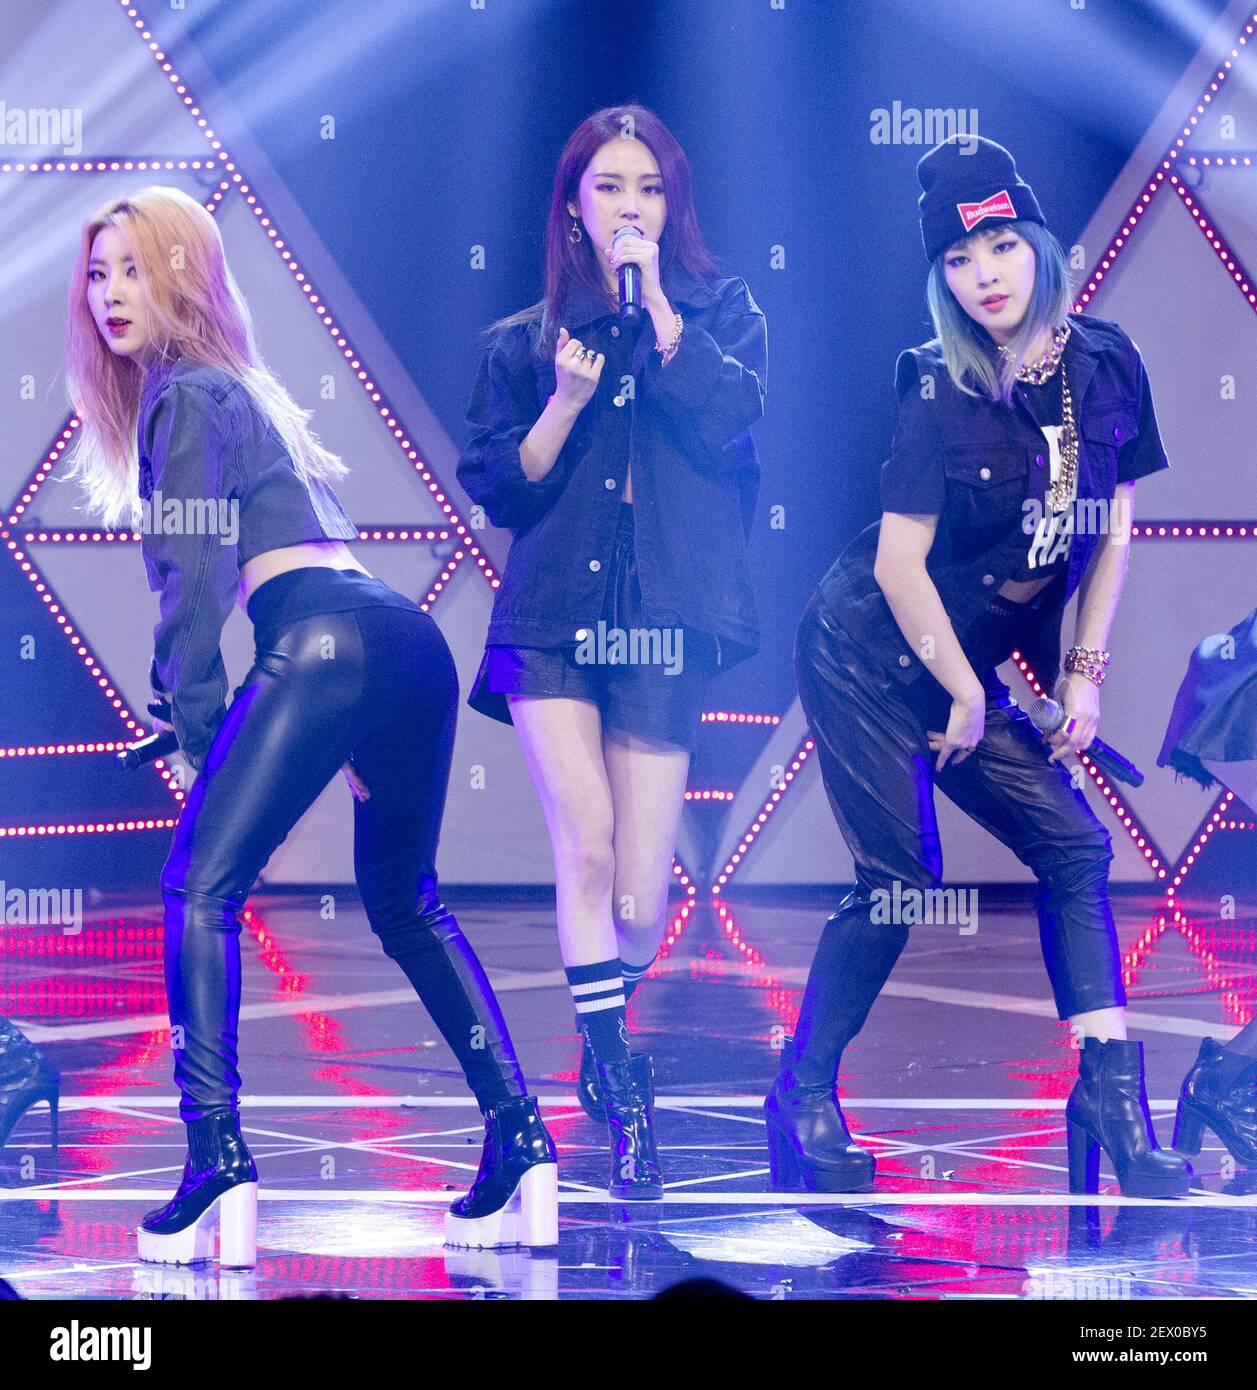 11 February 2015 Goyang, South Korea : South Korean girl group 4Minute, performs onstage during the MBC K-Pop music chart program 'Show Champion' at MBC Dream Center in Goyang, South